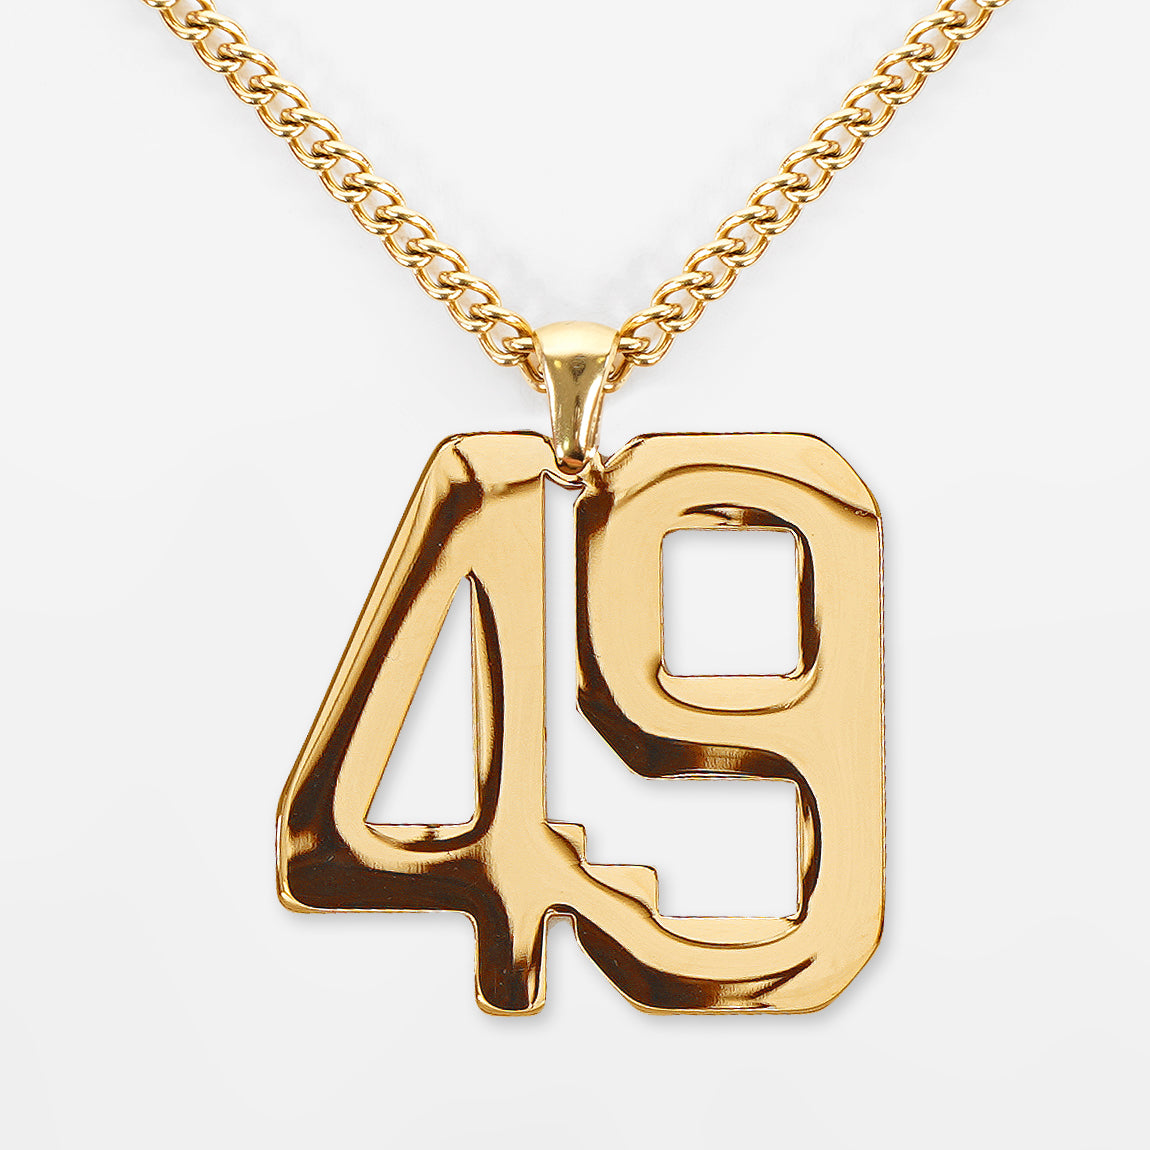 49 Number Pendant with Chain Necklace - Gold Plated Stainless Steel